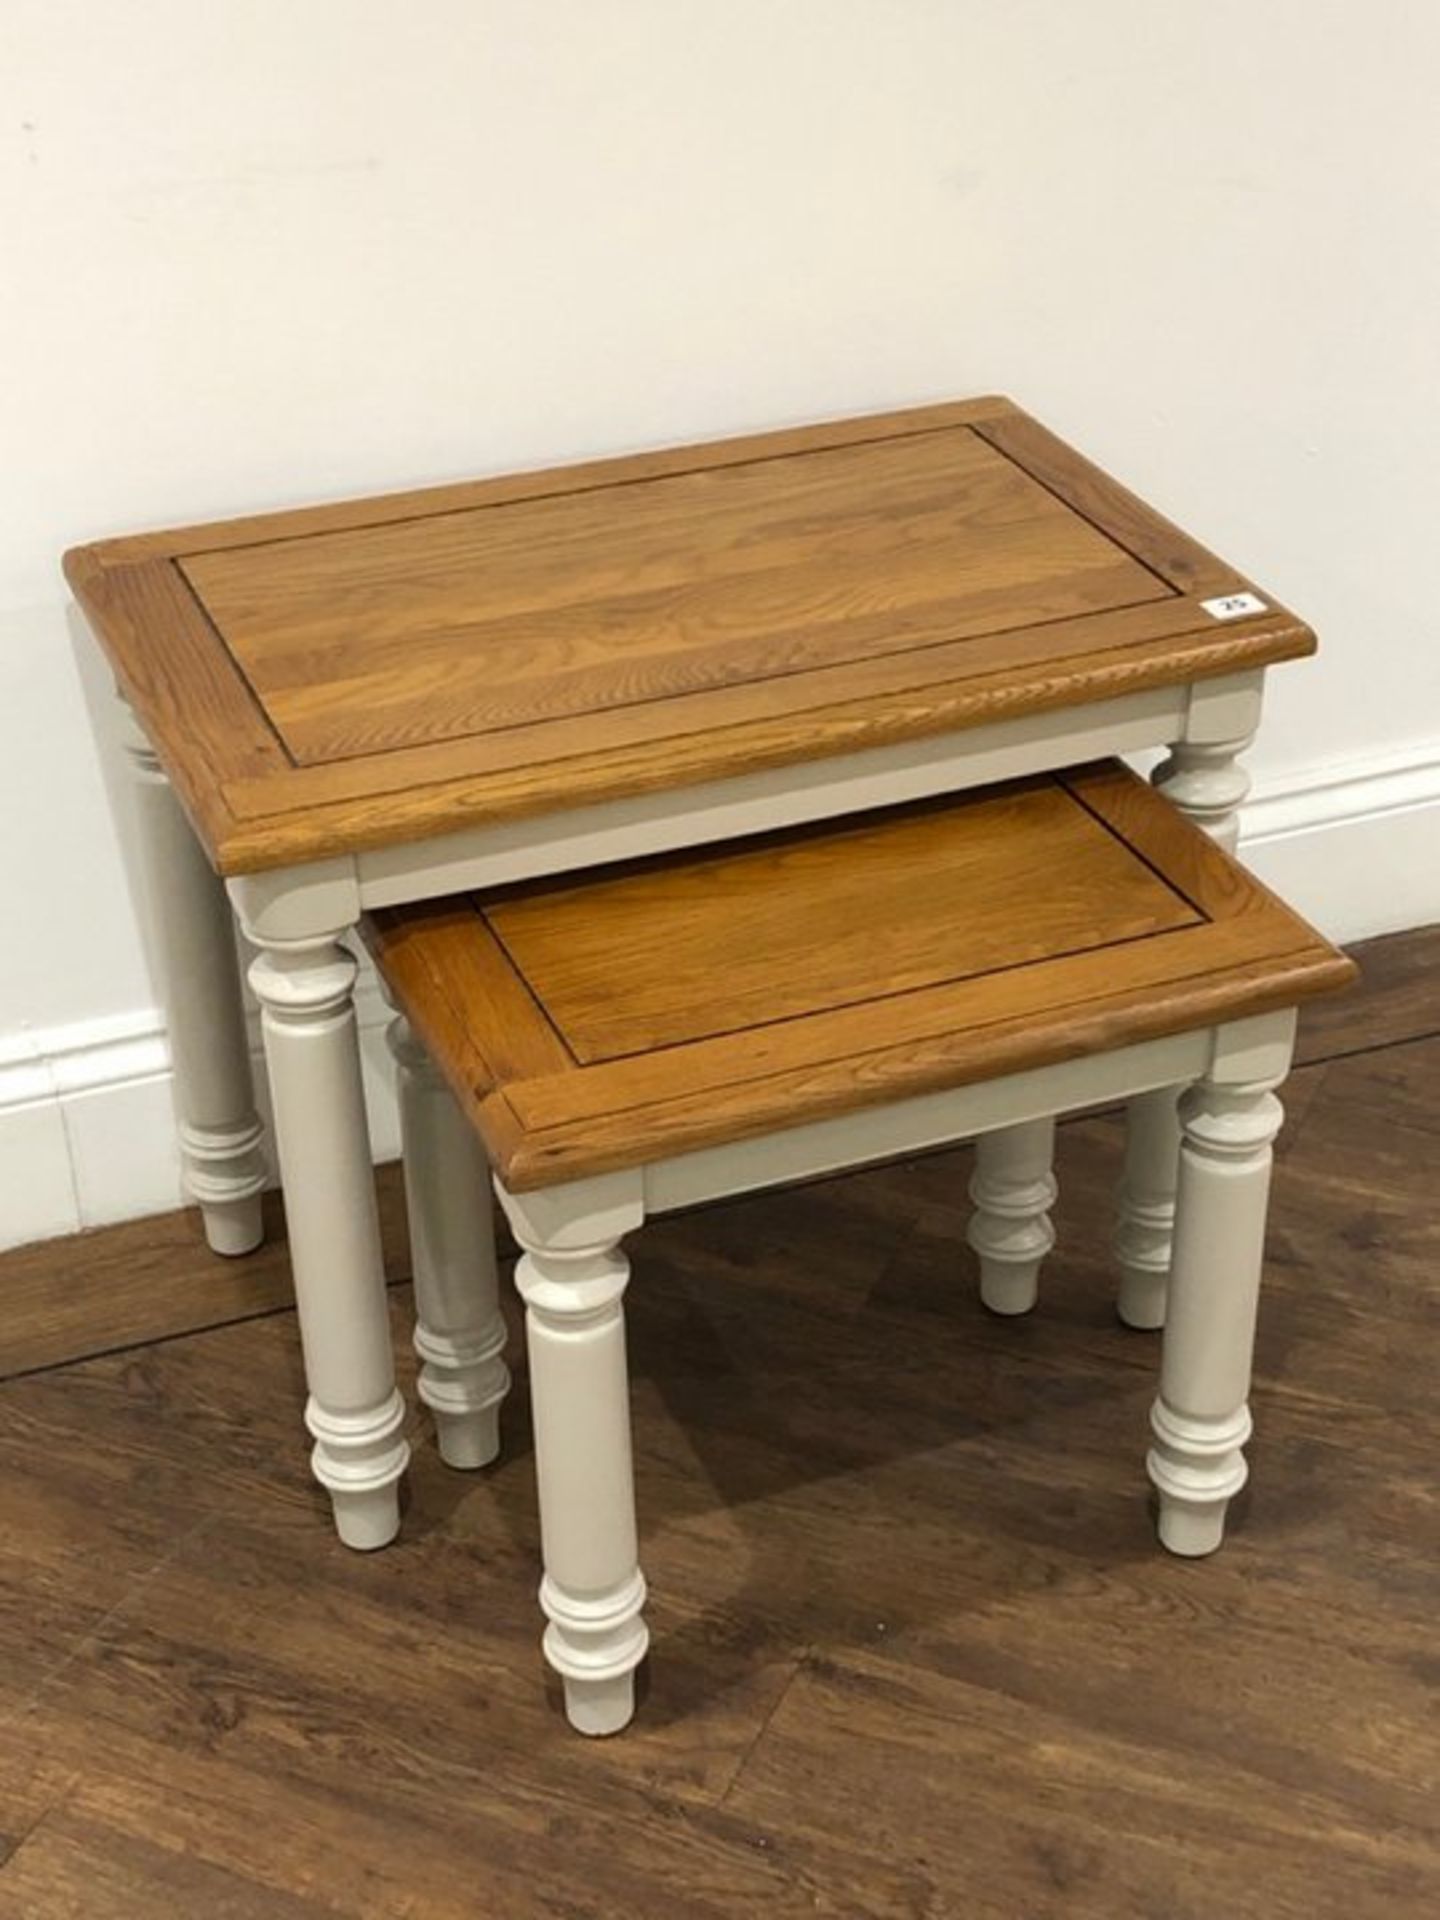 ROMAN RUSTIC DESIGNER NEST OF 2 SIDE TABLES IN NATURAL SOLID OAK AND PAINTED FINISH. RRP £249.